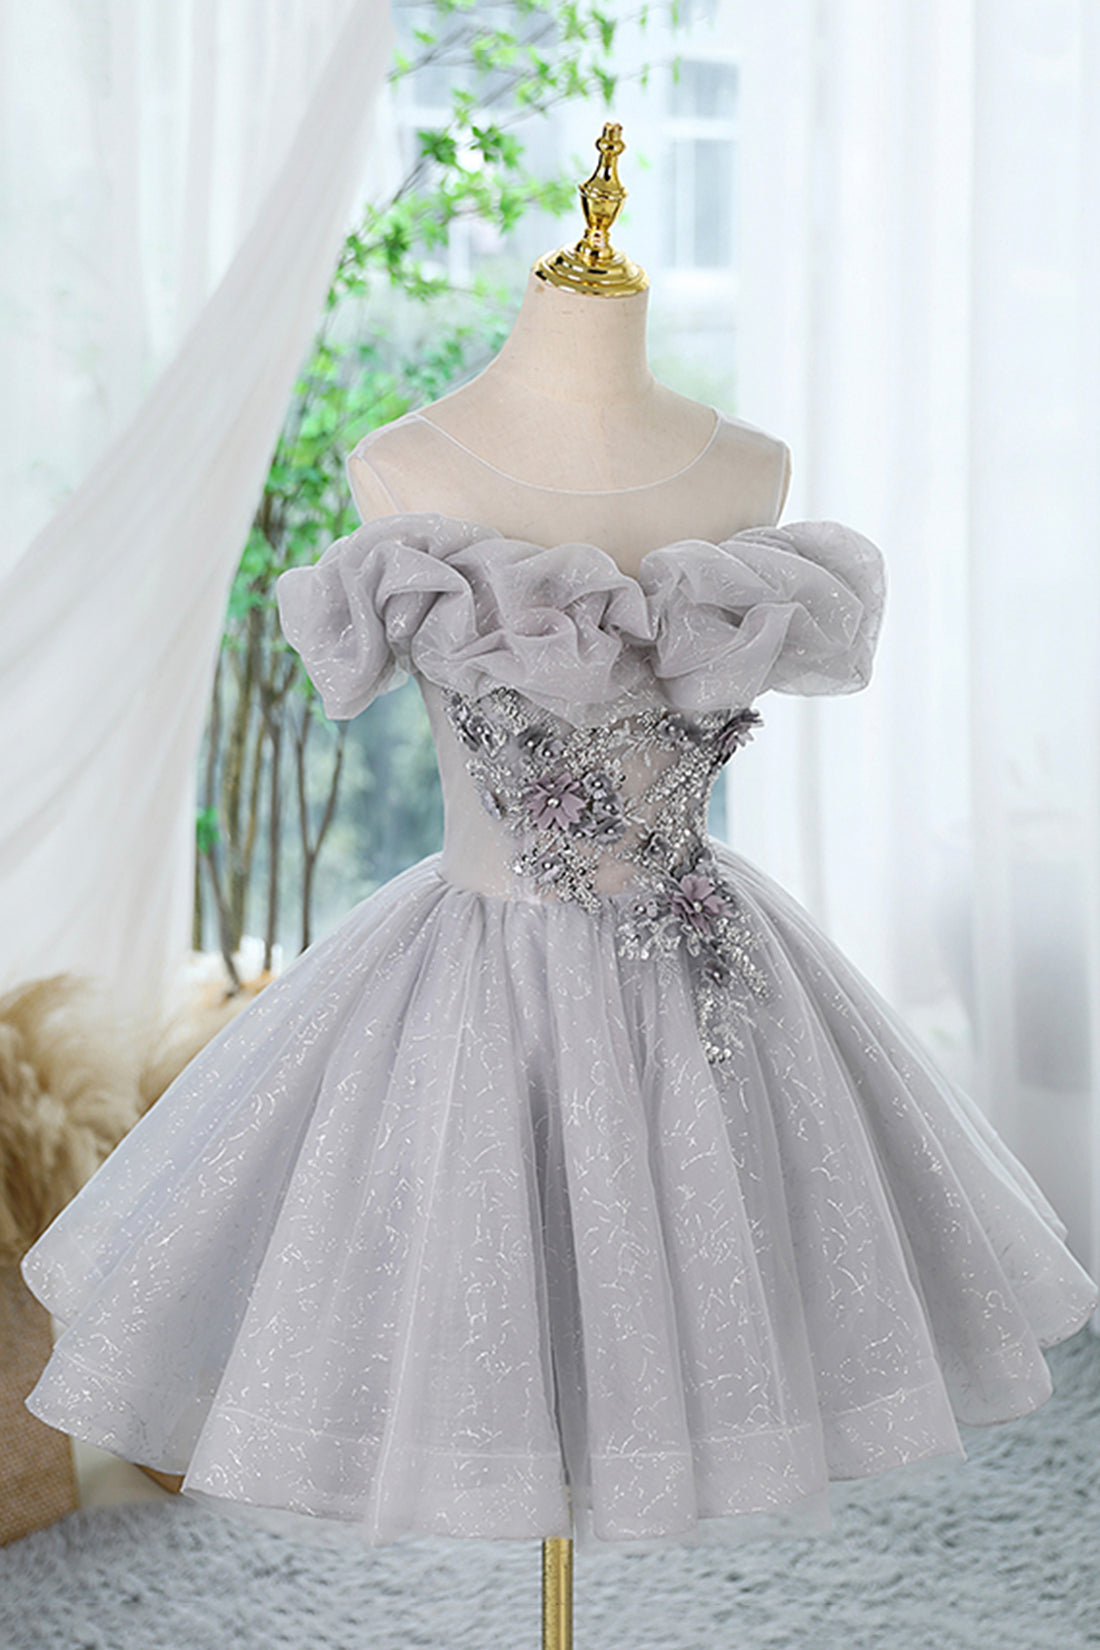 Prom Dress Light Gray Lace Illusion Neckline Ball Gown Short Sleeves  Ruffles Pageant Dresses - Milanoo.com